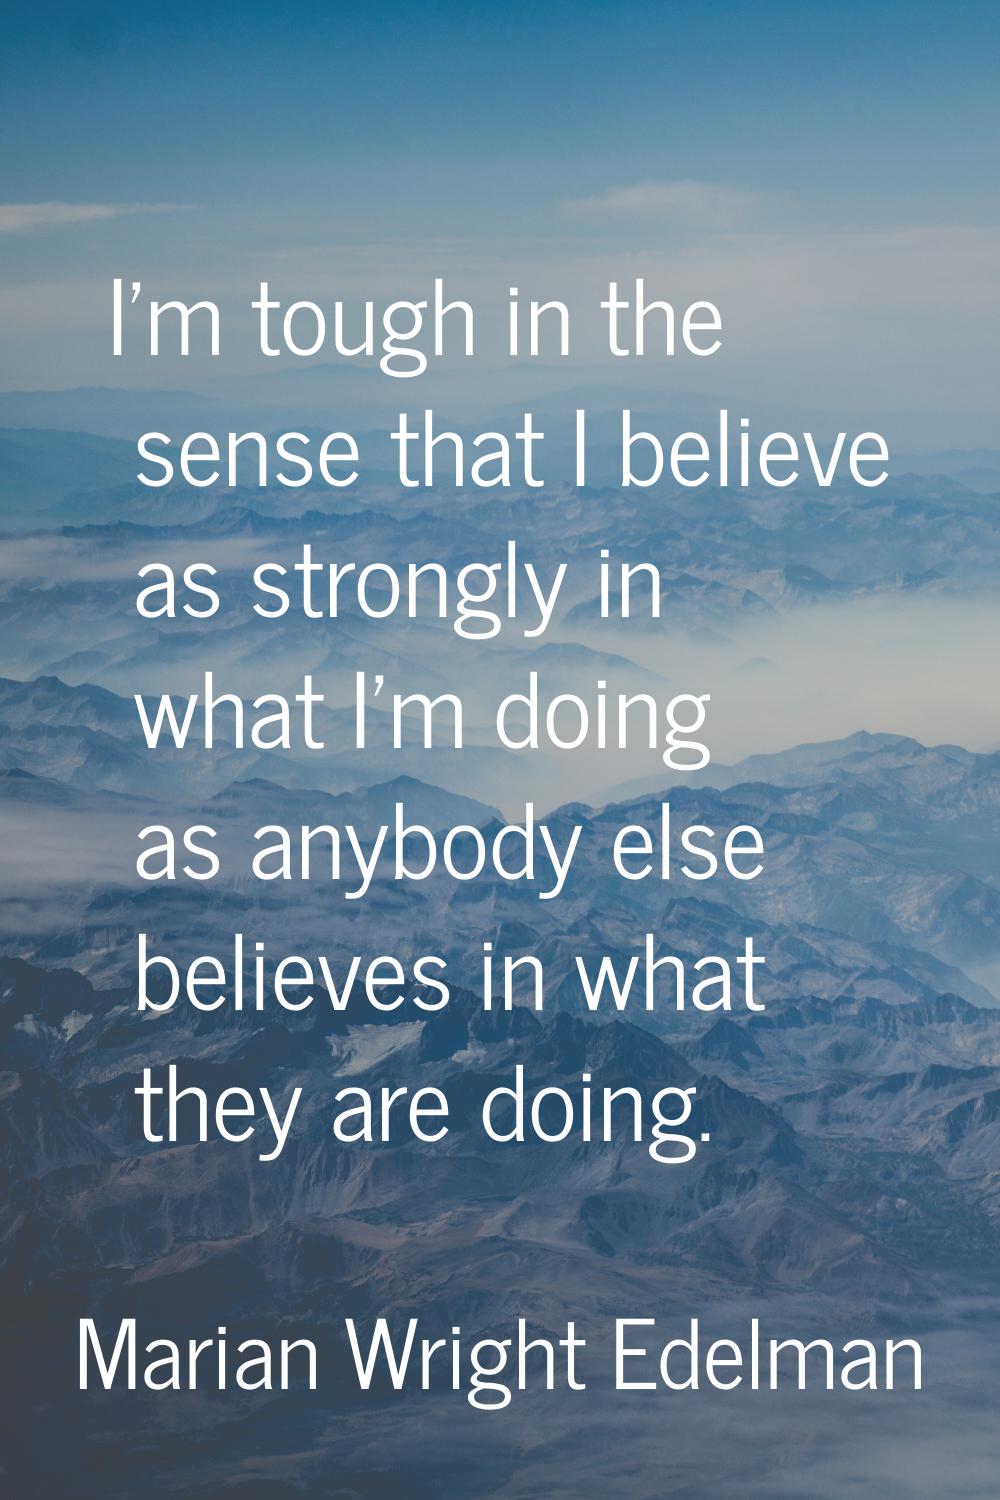 I'm tough in the sense that I believe as strongly in what I'm doing as anybody else believes in wha